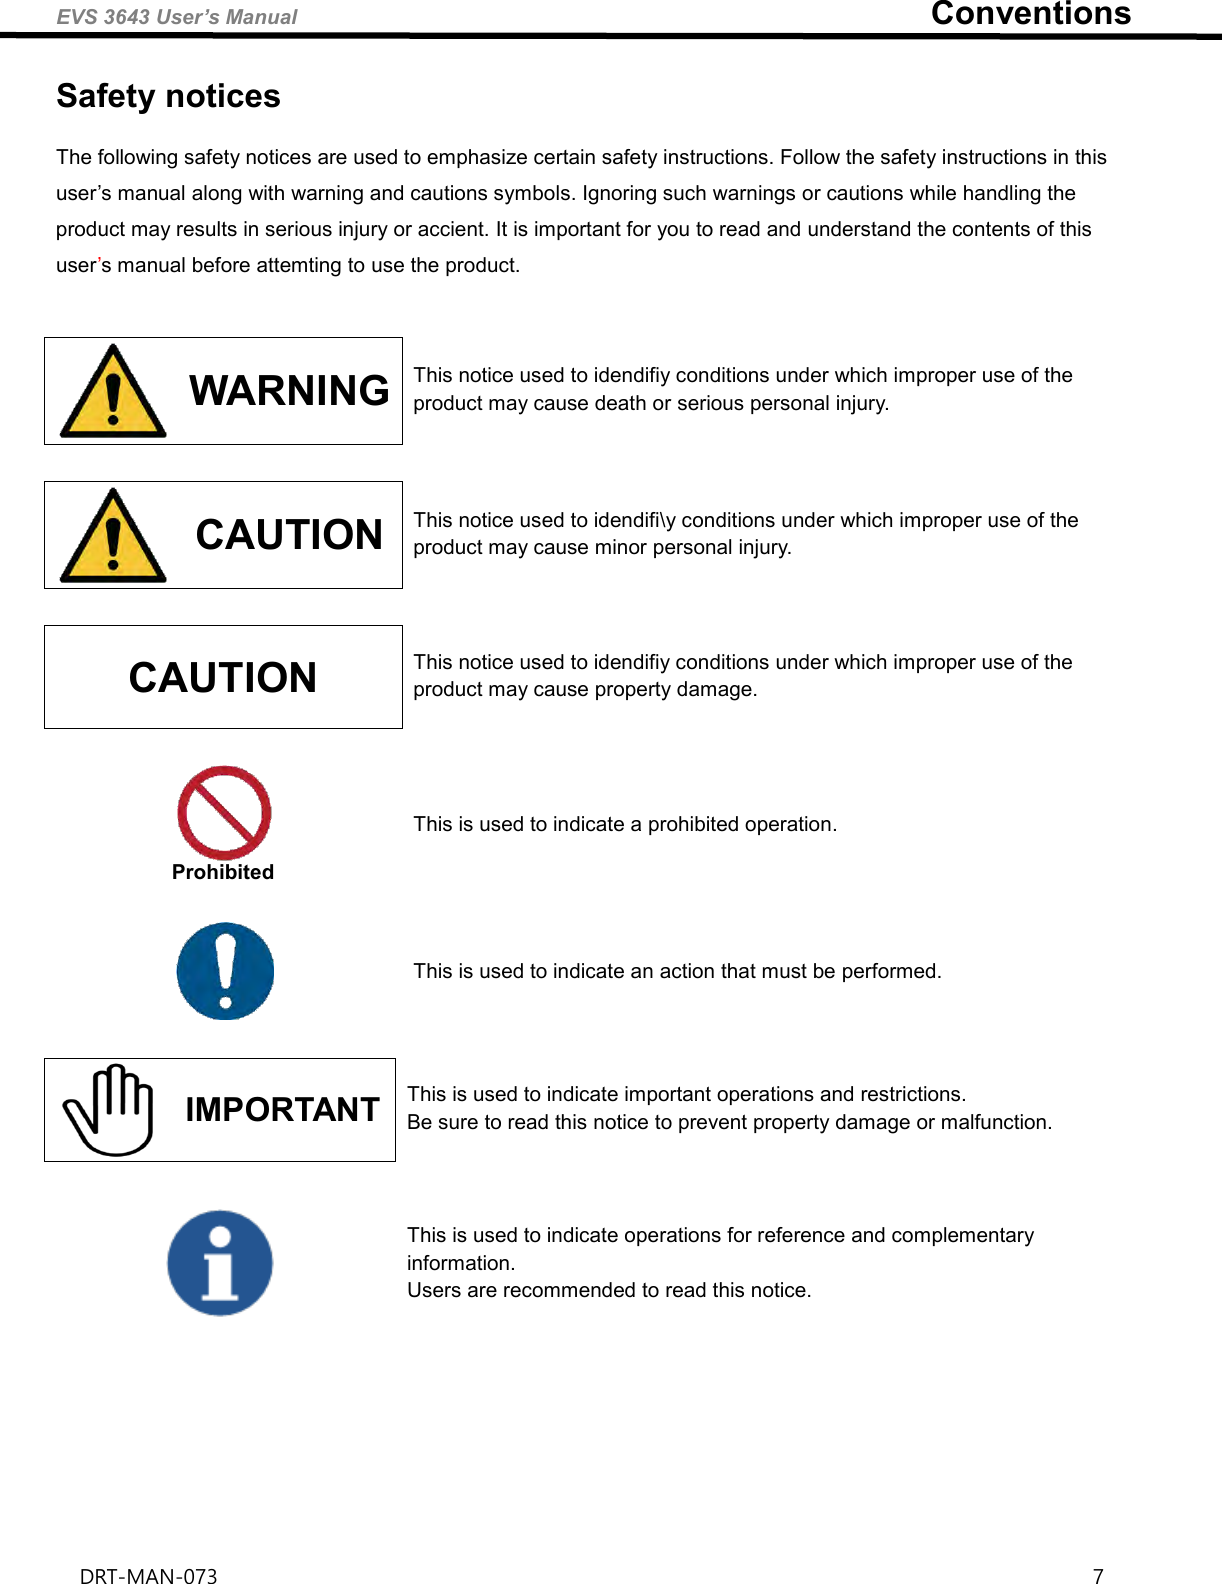 EVS 3643 User’s Manual                                                                            Conventions DRT-MAN-073                                                                                                                                                                  7   Safety notices The following safety notices are used to emphasize certain safety instructions. Follow the safety instructions in this user’s manual along with warning and cautions symbols. Ignoring such warnings or cautions while handling the product may results in serious injury or accient. It is important for you to read and understand the contents of this user’s manual before attemting to use the product.    WARNING This notice used to idendifiy conditions under which improper use of the product may cause death or serious personal injury.   CAUTION This notice used to idendifi\y conditions under which improper use of the product may cause minor personal injury.  CAUTION This notice used to idendifiy conditions under which improper use of the product may cause property damage.   Prohibited This is used to indicate a prohibited operation.   This is used to indicate an action that must be performed.   IMPORTANT This is used to indicate important operations and restrictions.   Be sure to read this notice to prevent property damage or malfunction.   This is used to indicate operations for reference and complementary information. Users are recommended to read this notice.     